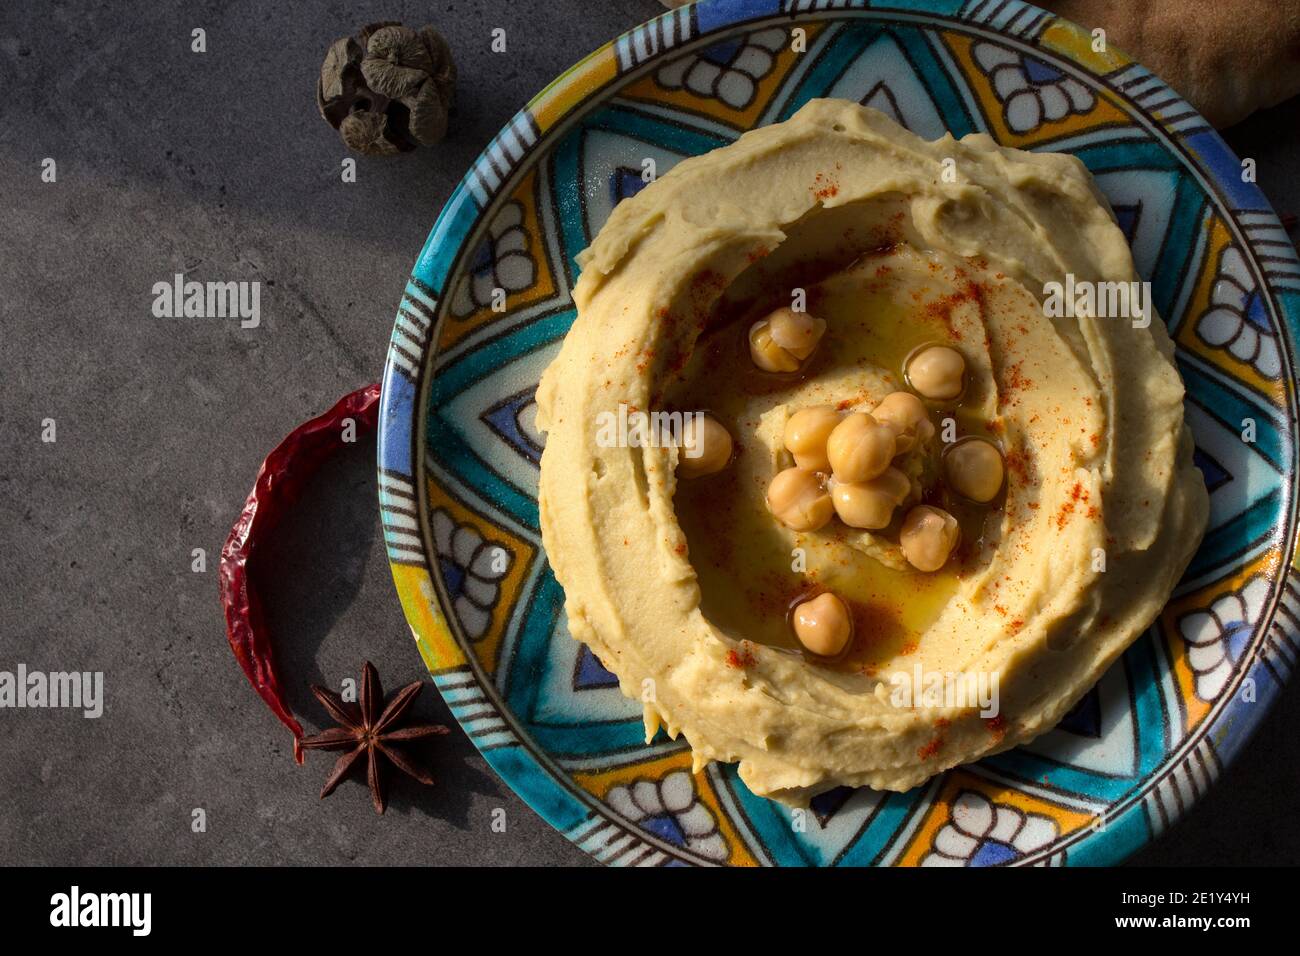 Close up photo of fresh homemade hummus on colorful ceramic plate. Balanced meal photo. Healthy eating concept. Authentic food of Middle East. Stock Photo